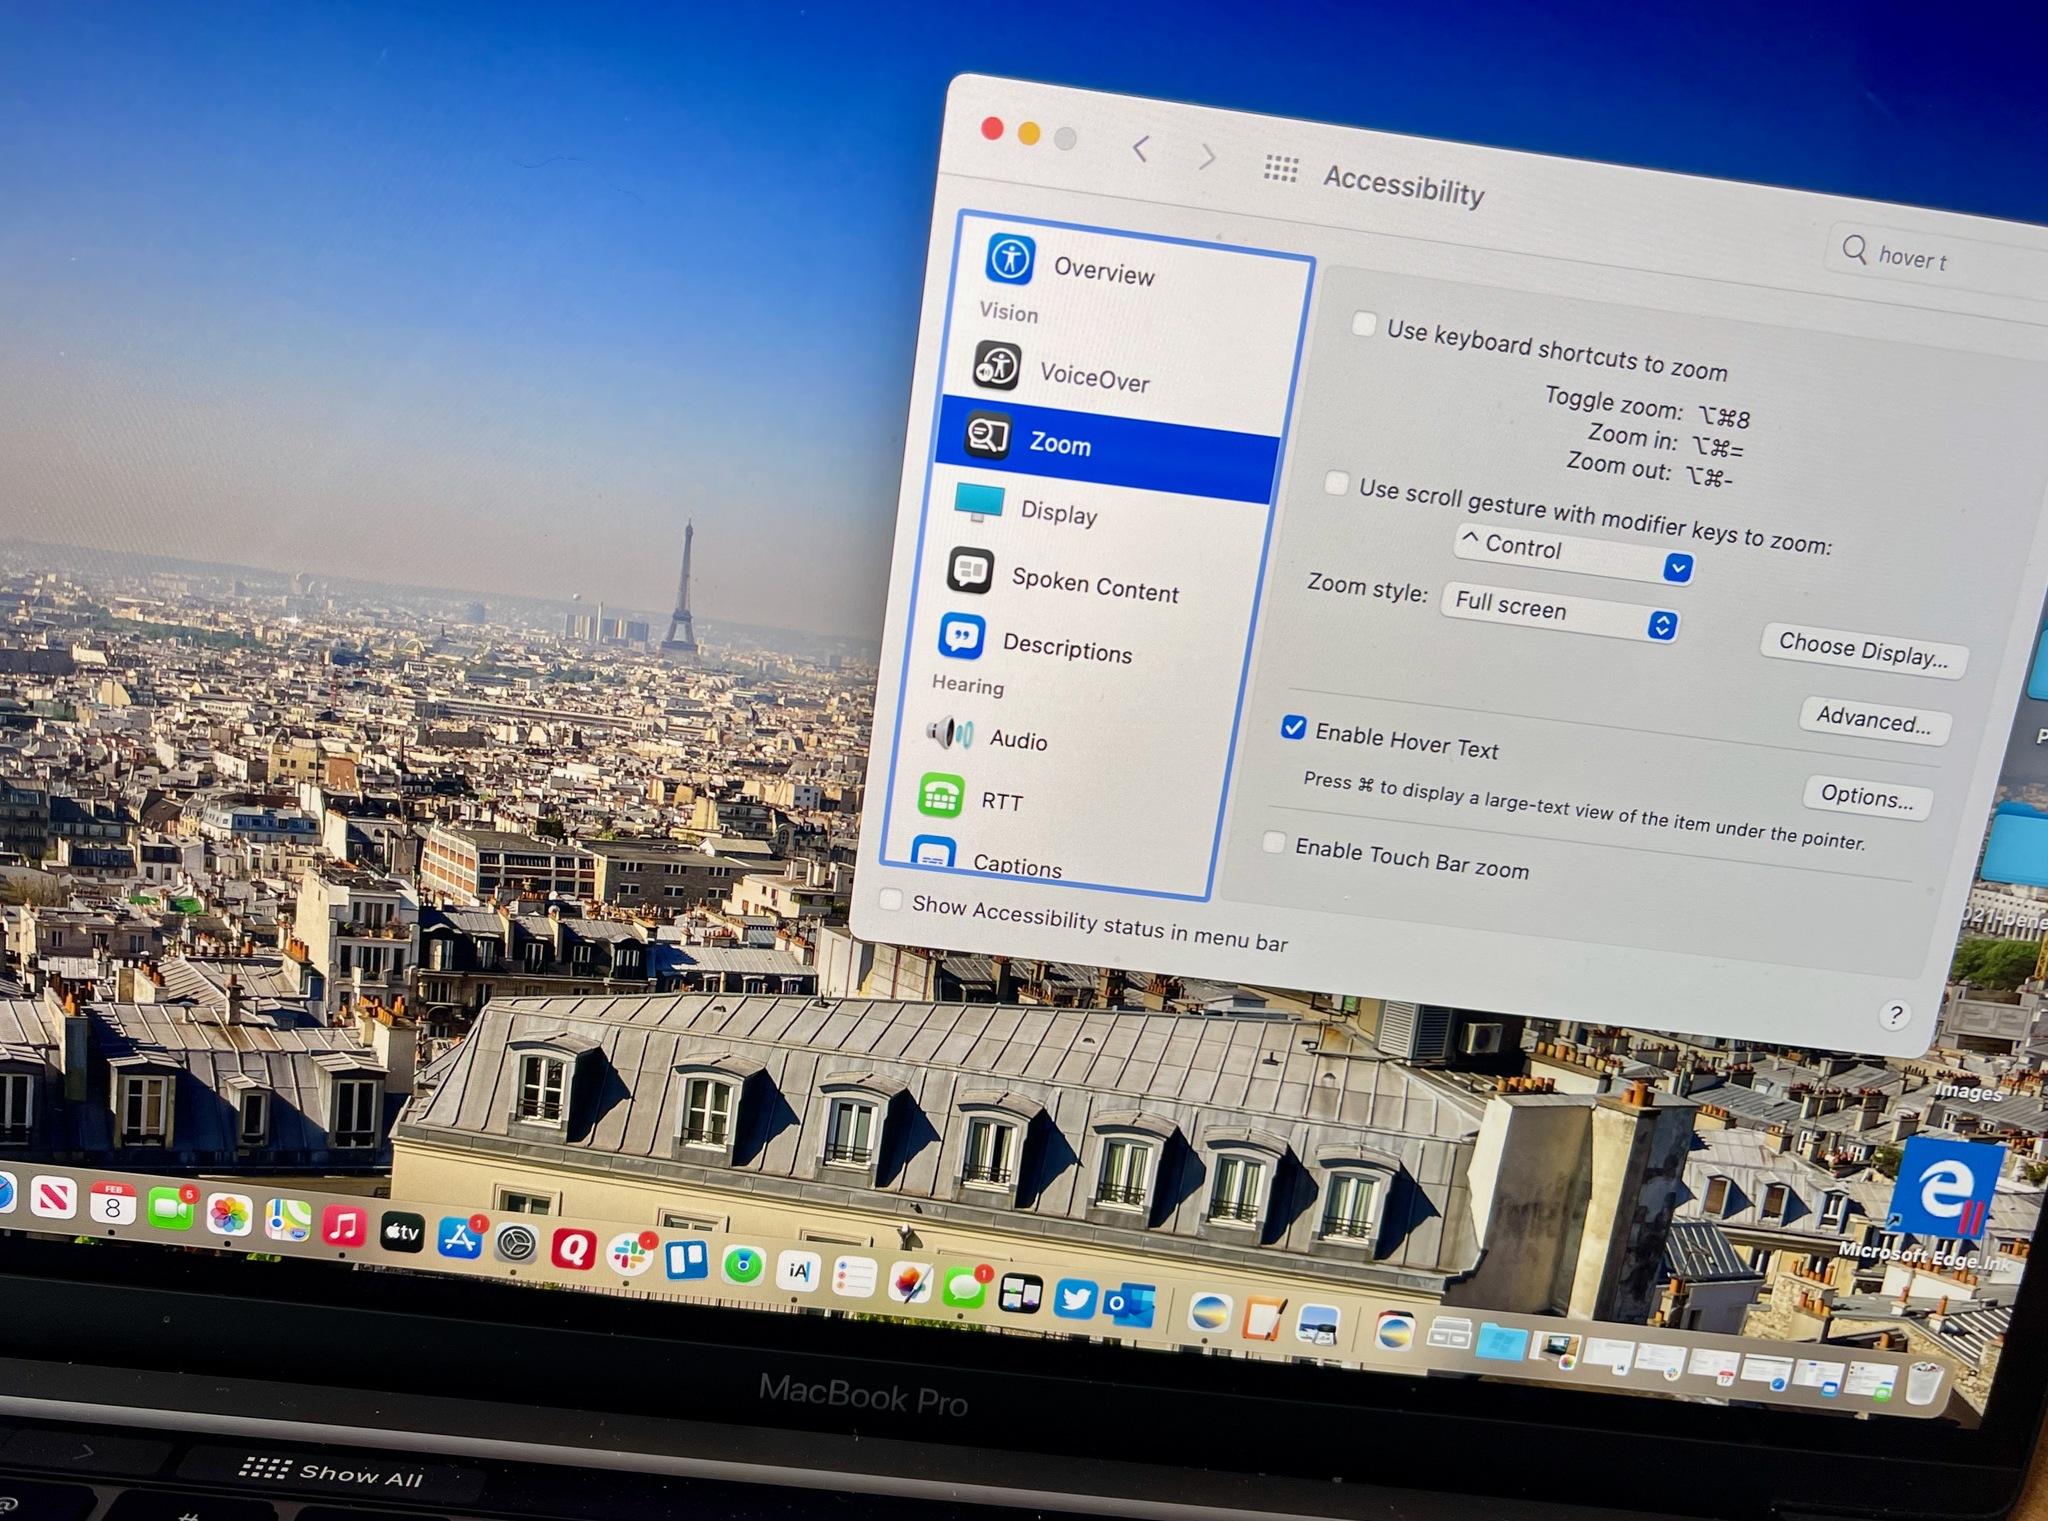 How to use Accessibility's zoom feature on Mac